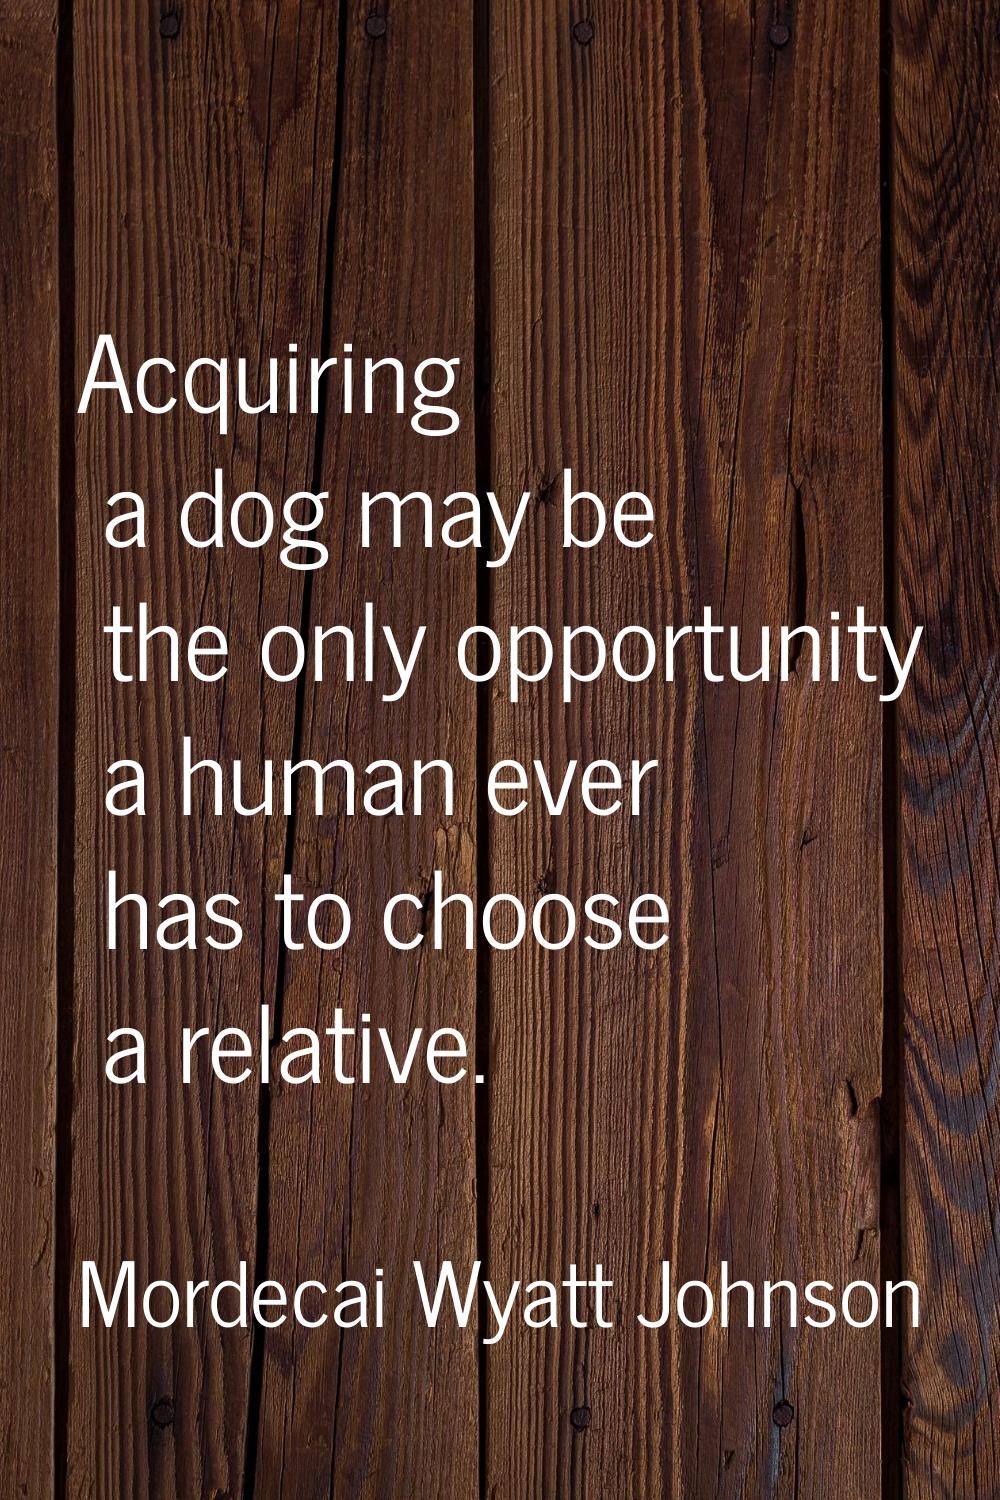 Acquiring a dog may be the only opportunity a human ever has to choose a relative.